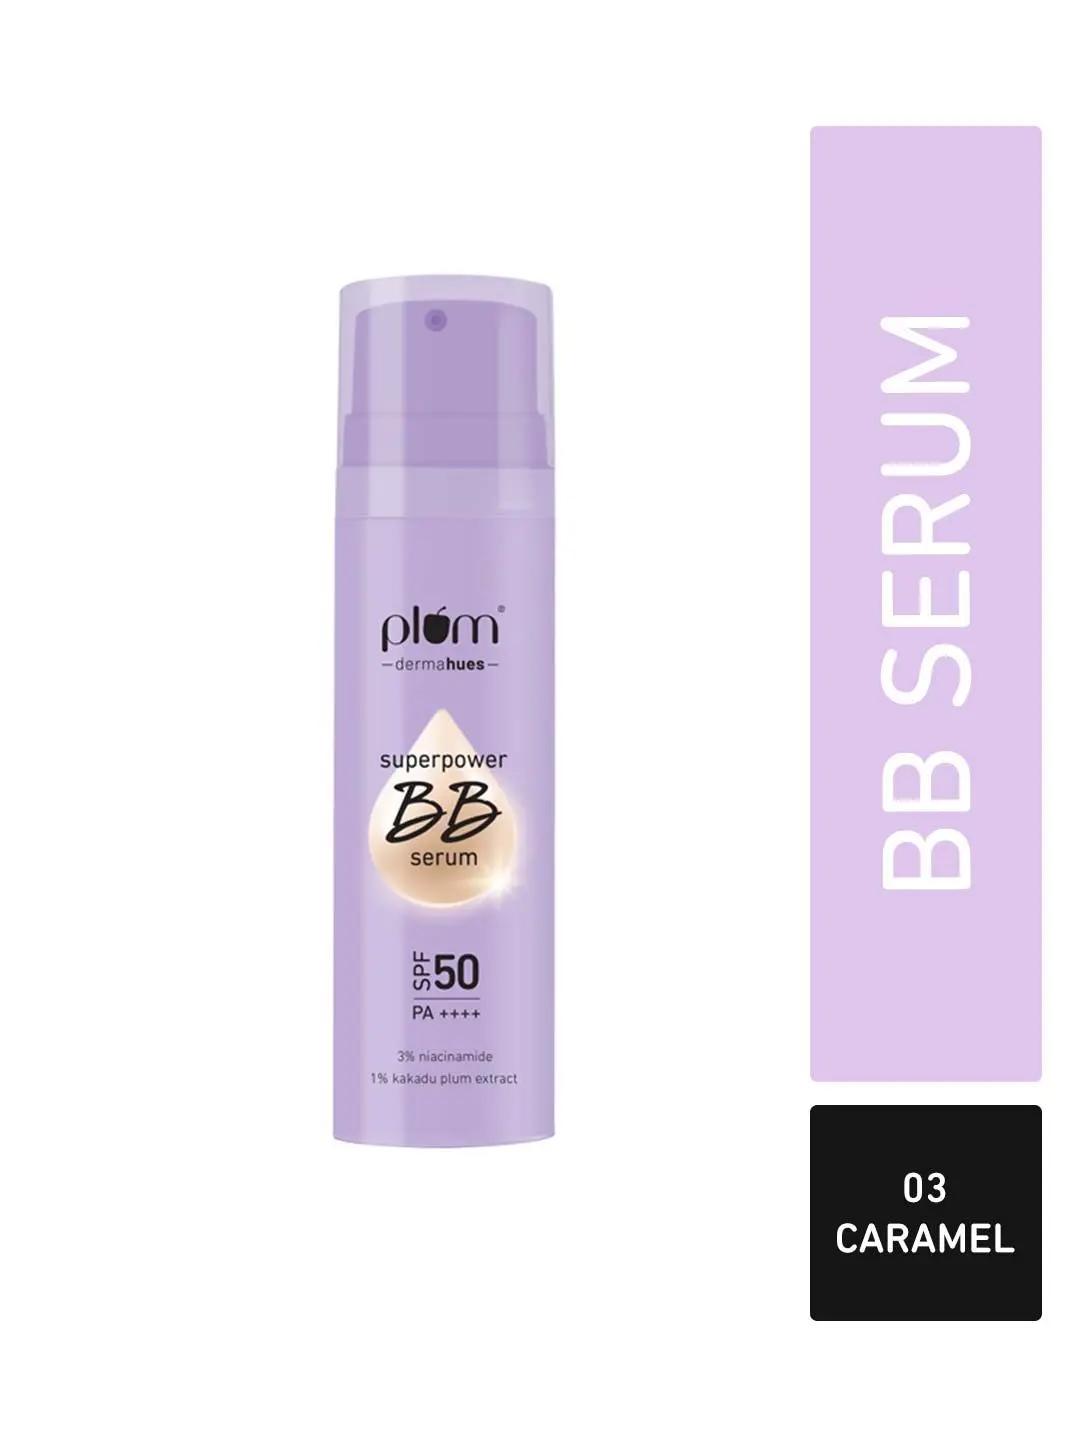 Plum Superpower BB Serum with SPF 50 PA ++++ | Natural Everyday Base | Evens Out Skin Tone | Buildable Coverage | With 3% Niacinamide | 100% Vegan & Cruelty Free | 30 ml - 03 Caramel